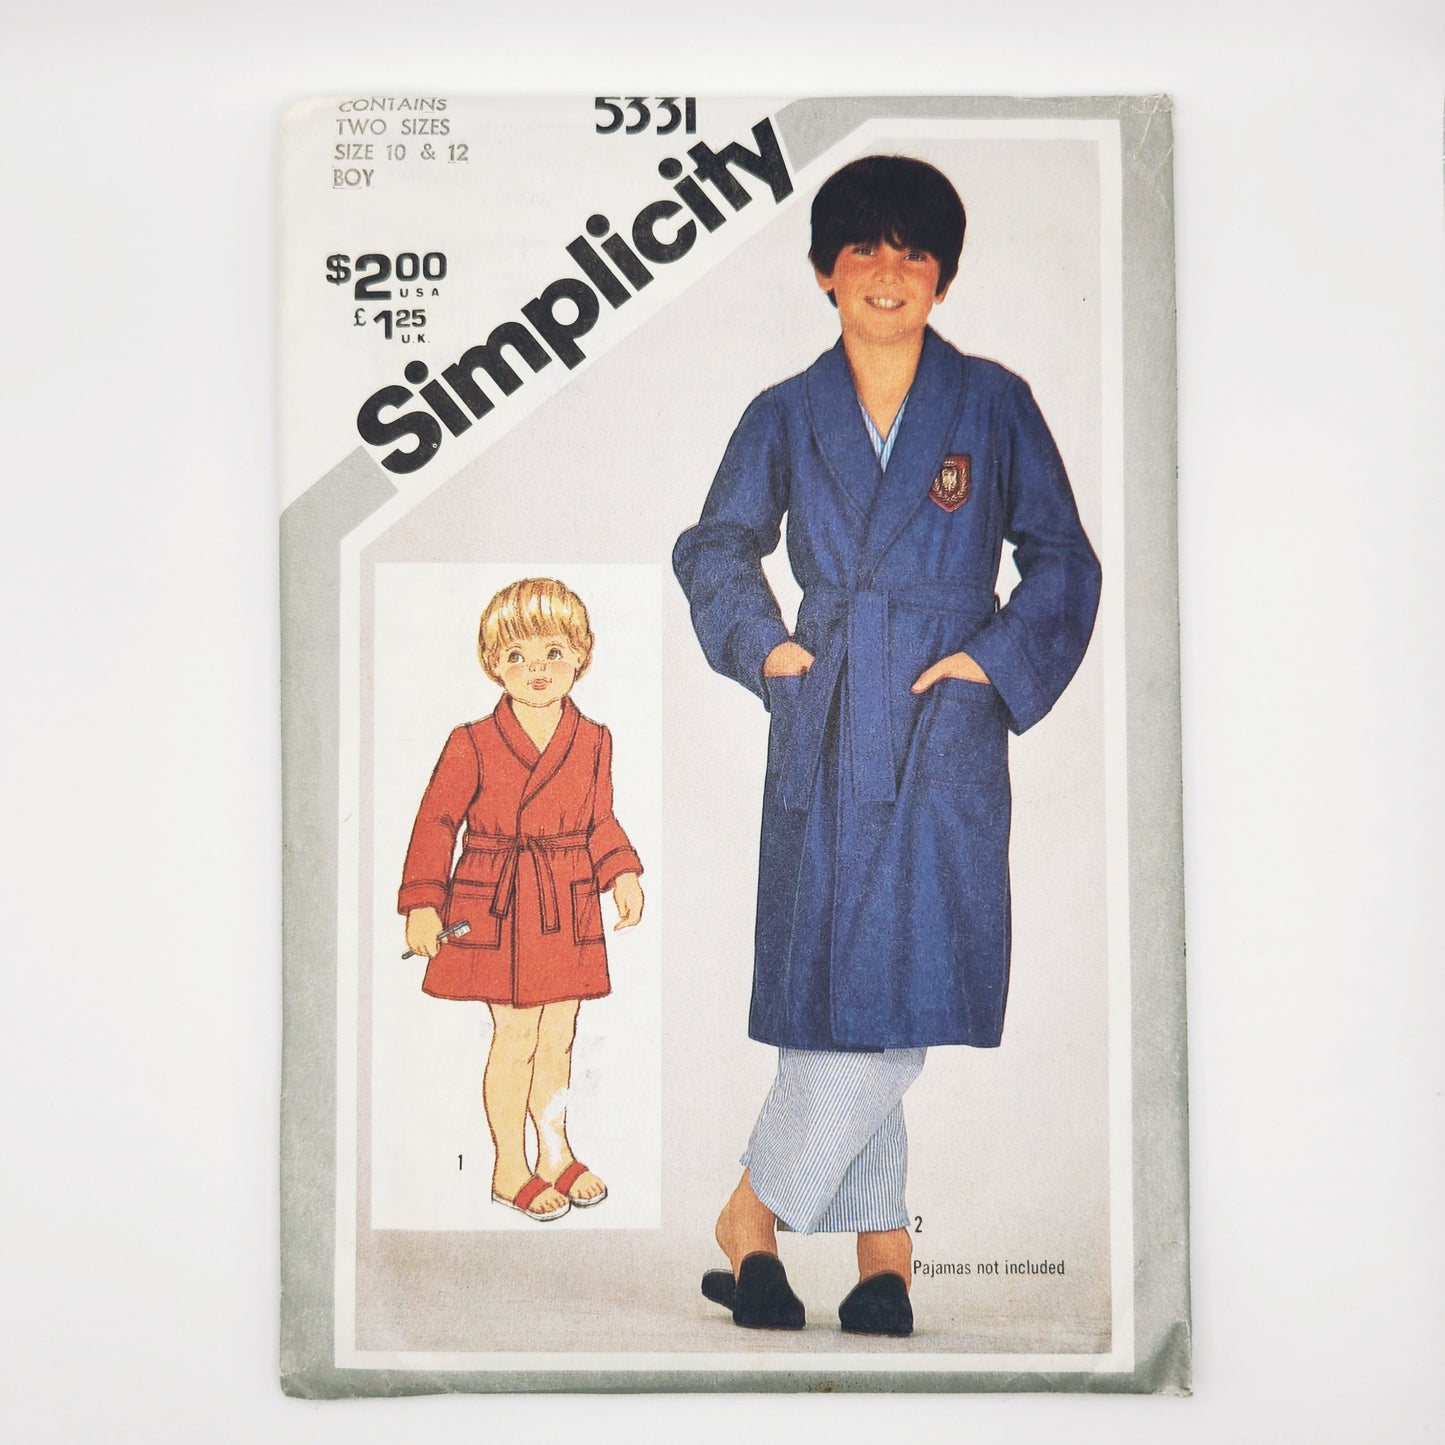 1981 Simplicity Pattern 5331 Boys Robe Two Lengths Size 10-12